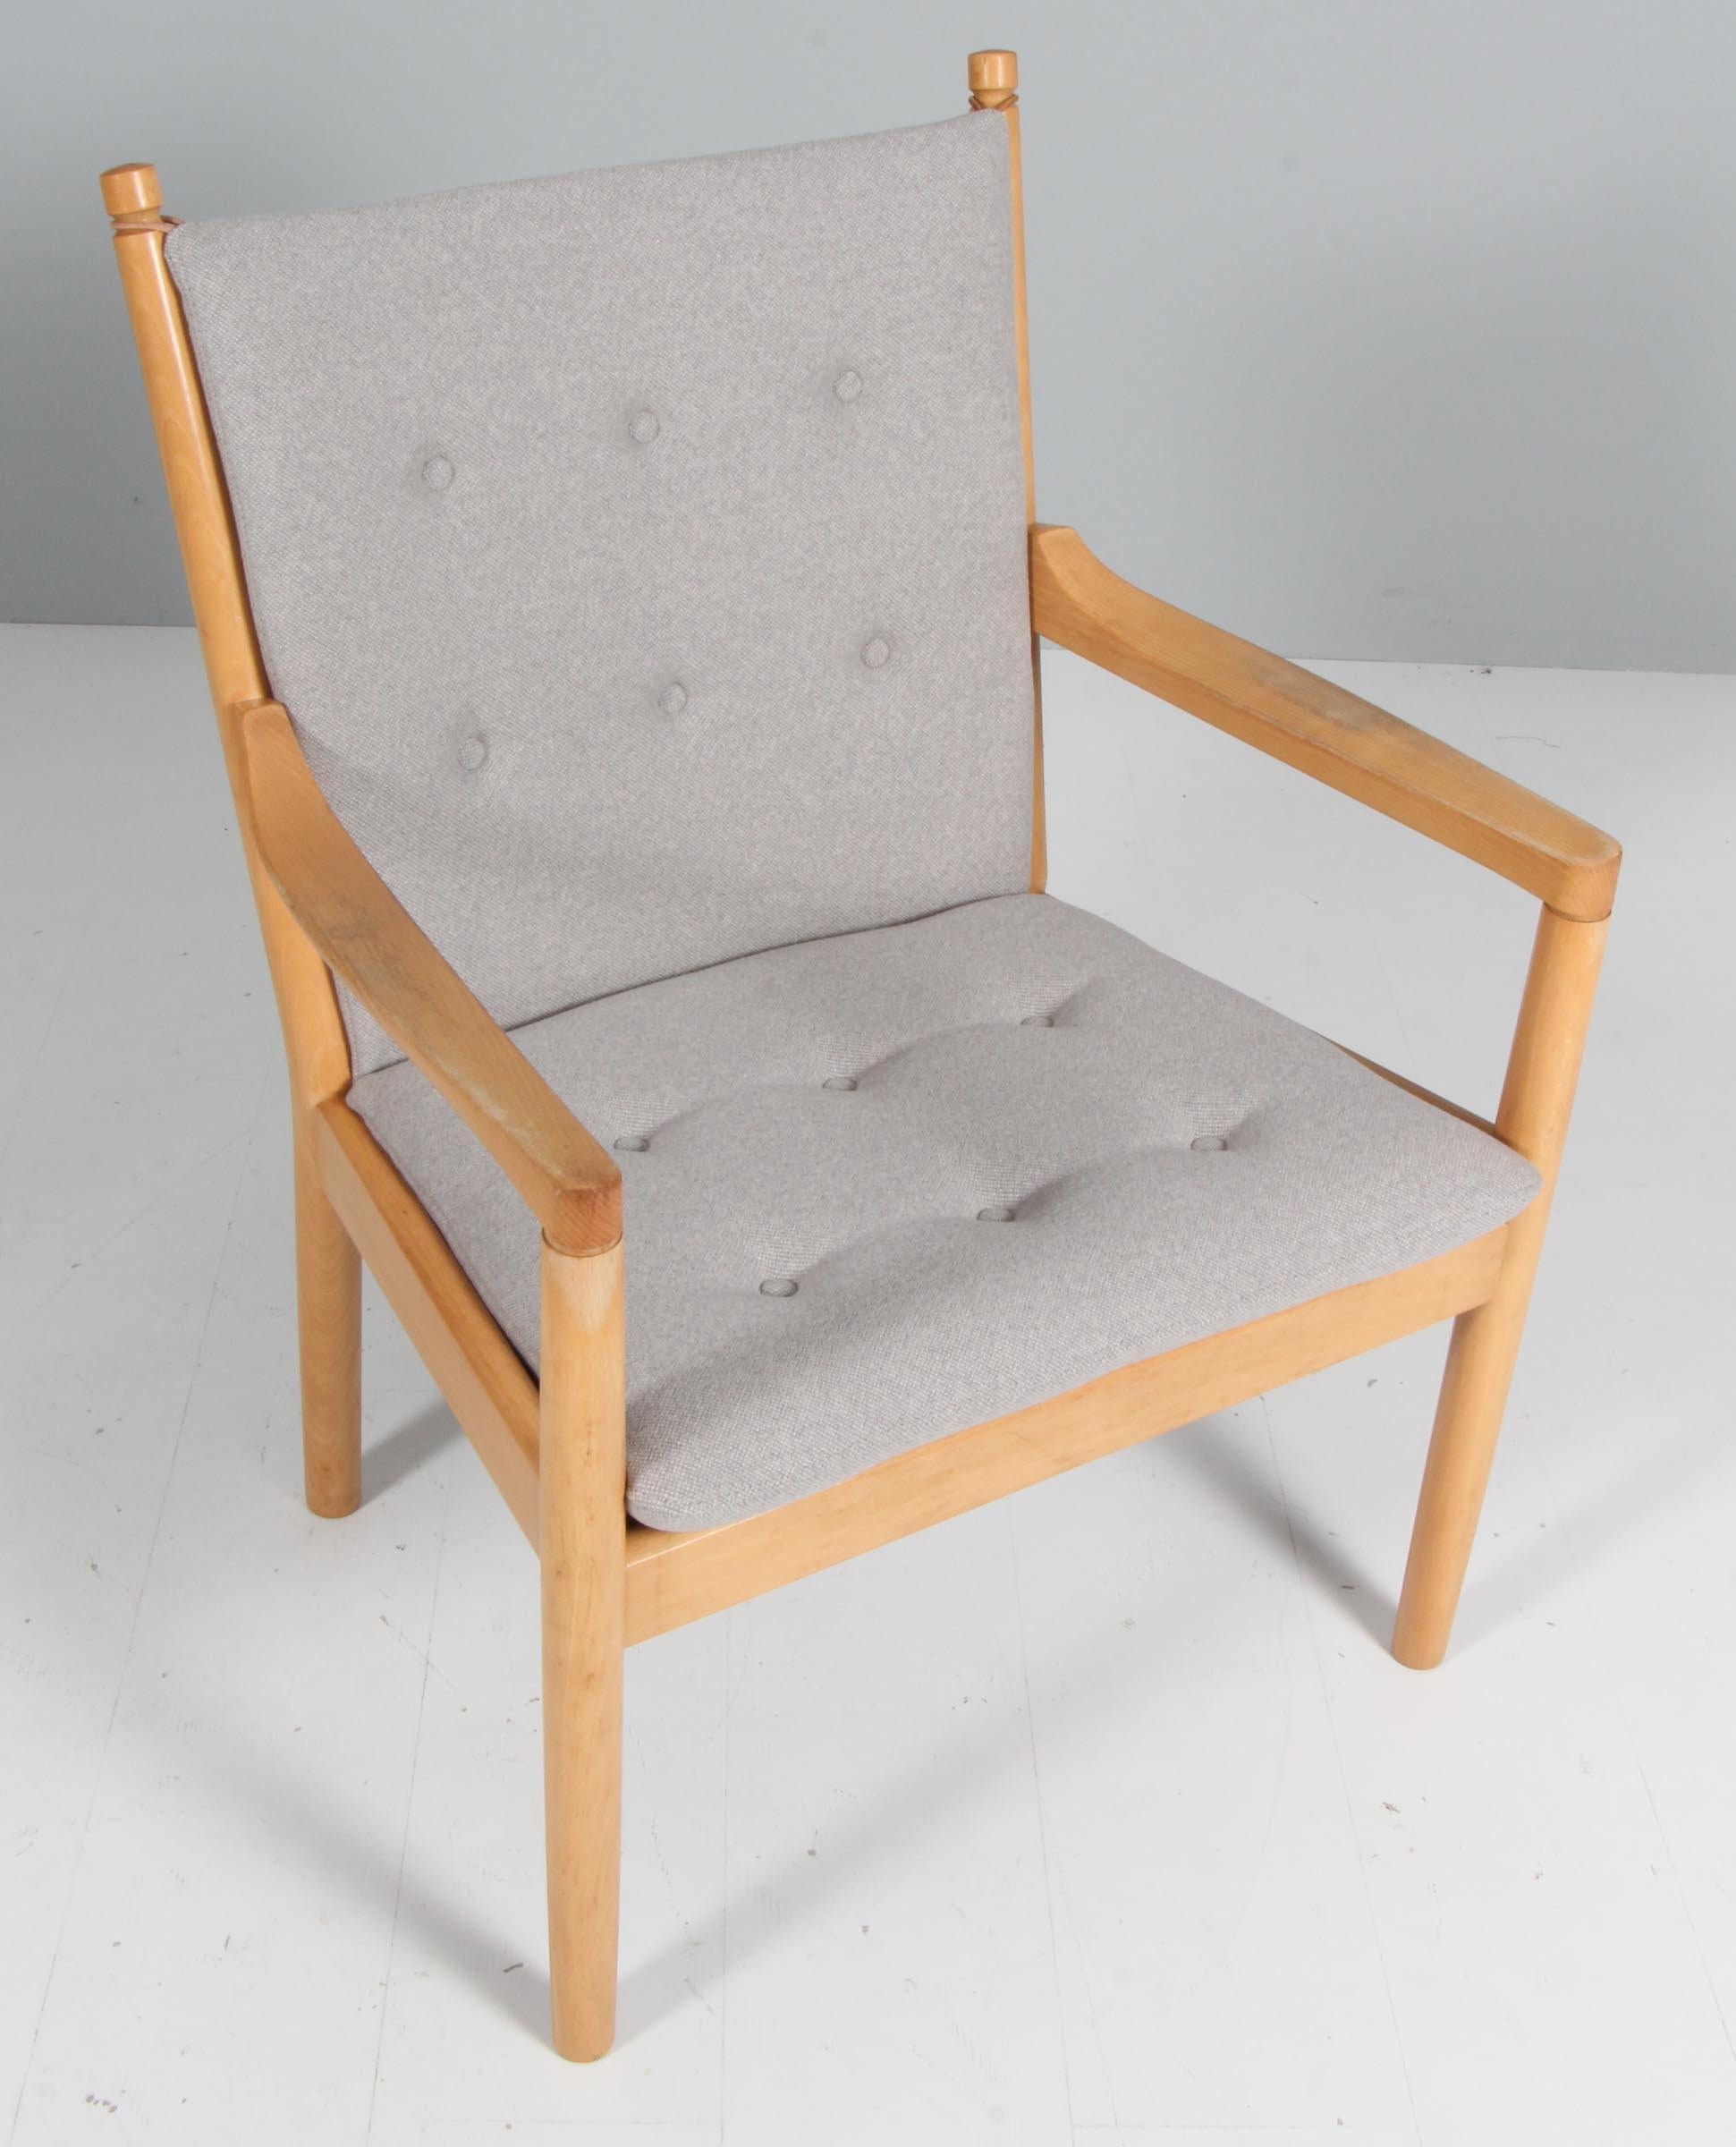 Hans Wegner, lounge or armchair new upholstered with antifabric wool from Kvadrat

Frame in solid beech.

Model 1788, made by Fritz Hansen.

